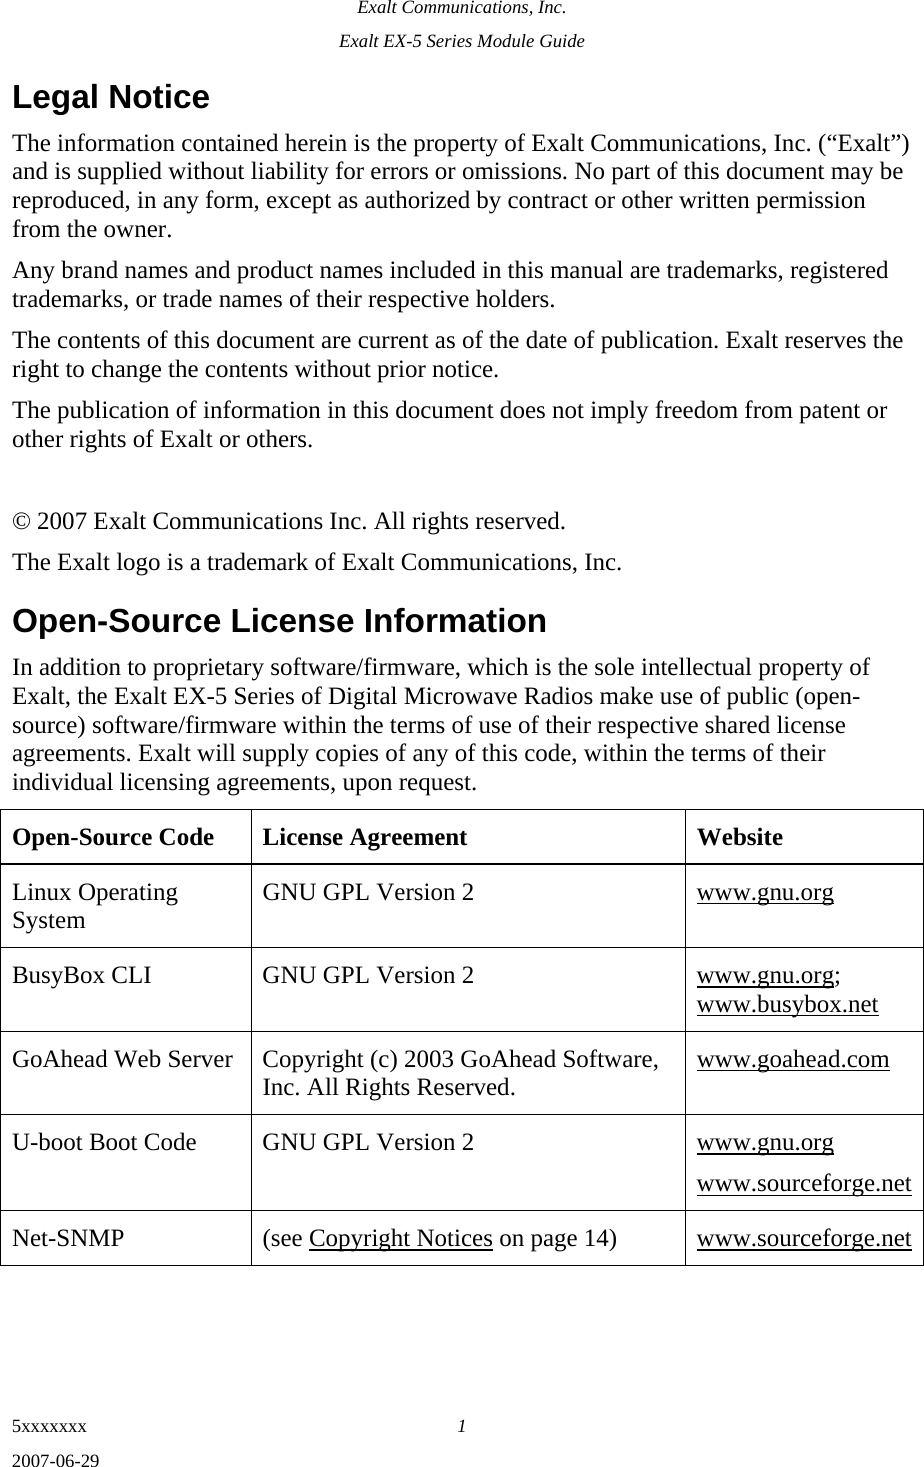 Exalt Communications, Inc. Exalt EX-5 Series Module Guide 5xxxxxxx  1 2007-06-29 Legal Notice The information contained herein is the property of Exalt Communications, Inc. (“Exalt”) and is supplied without liability for errors or omissions. No part of this document may be reproduced, in any form, except as authorized by contract or other written permission from the owner. Any brand names and product names included in this manual are trademarks, registered trademarks, or trade names of their respective holders. The contents of this document are current as of the date of publication. Exalt reserves the right to change the contents without prior notice. The publication of information in this document does not imply freedom from patent or other rights of Exalt or others.  © 2007 Exalt Communications Inc. All rights reserved. The Exalt logo is a trademark of Exalt Communications, Inc. Open-Source License Information In addition to proprietary software/firmware, which is the sole intellectual property of Exalt, the Exalt EX-5 Series of Digital Microwave Radios make use of public (open-source) software/firmware within the terms of use of their respective shared license agreements. Exalt will supply copies of any of this code, within the terms of their individual licensing agreements, upon request. Open-Source Code  License Agreement  Website Linux Operating System  GNU GPL Version 2  www.gnu.org BusyBox CLI  GNU GPL Version 2  www.gnu.org; www.busybox.net GoAhead Web Server  Copyright (c) 2003 GoAhead Software, Inc. All Rights Reserved.  www.goahead.com  U-boot Boot Code  GNU GPL Version 2  www.gnu.org www.sourceforge.net Net-SNMP  (see Copyright Notices on page 14)  www.sourceforge.net 